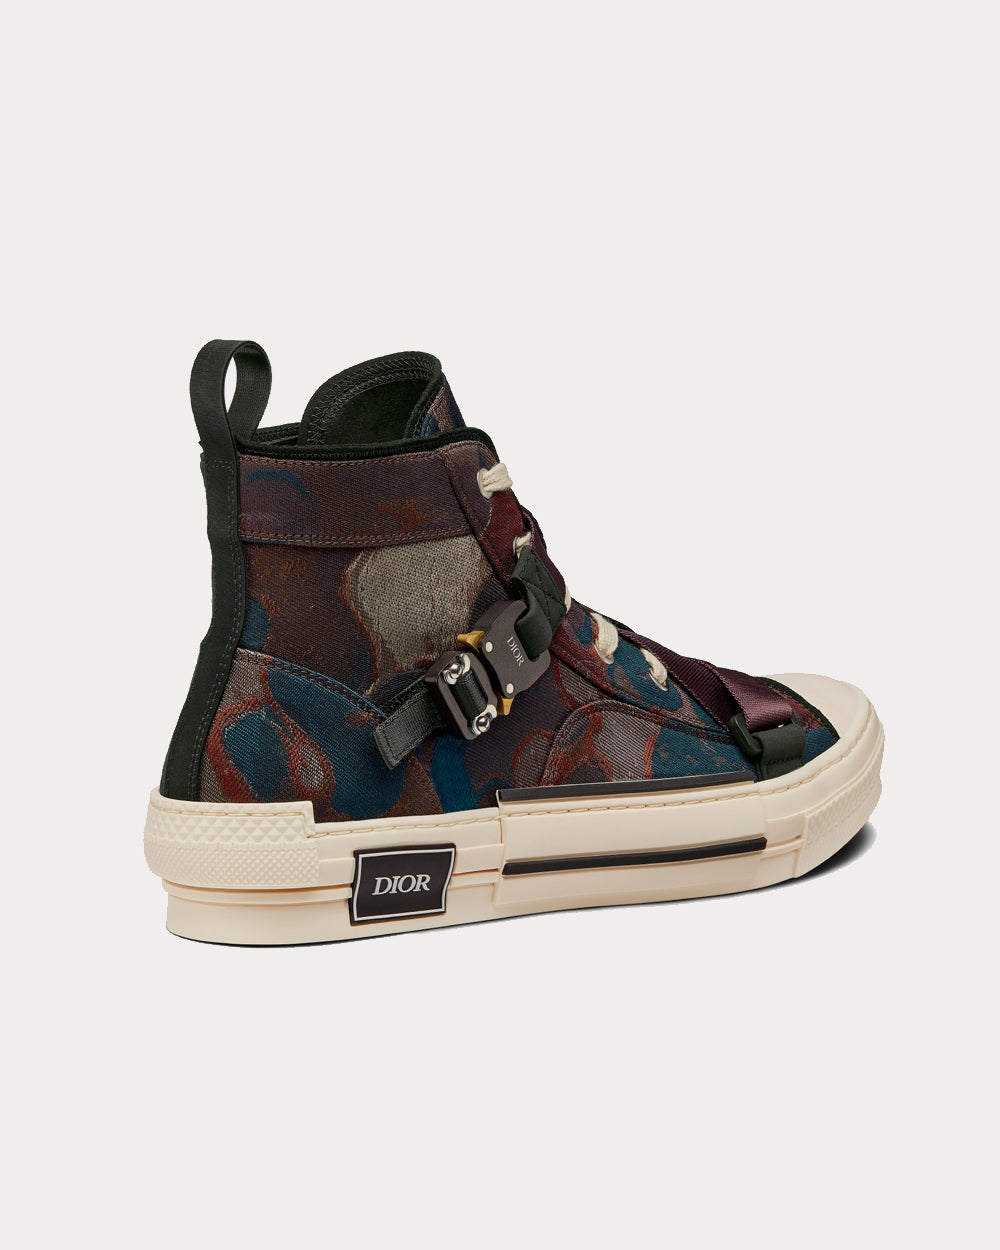 Dior x Peter Doig - B23 Brown Camouflage Jacquard High Top Sneakers